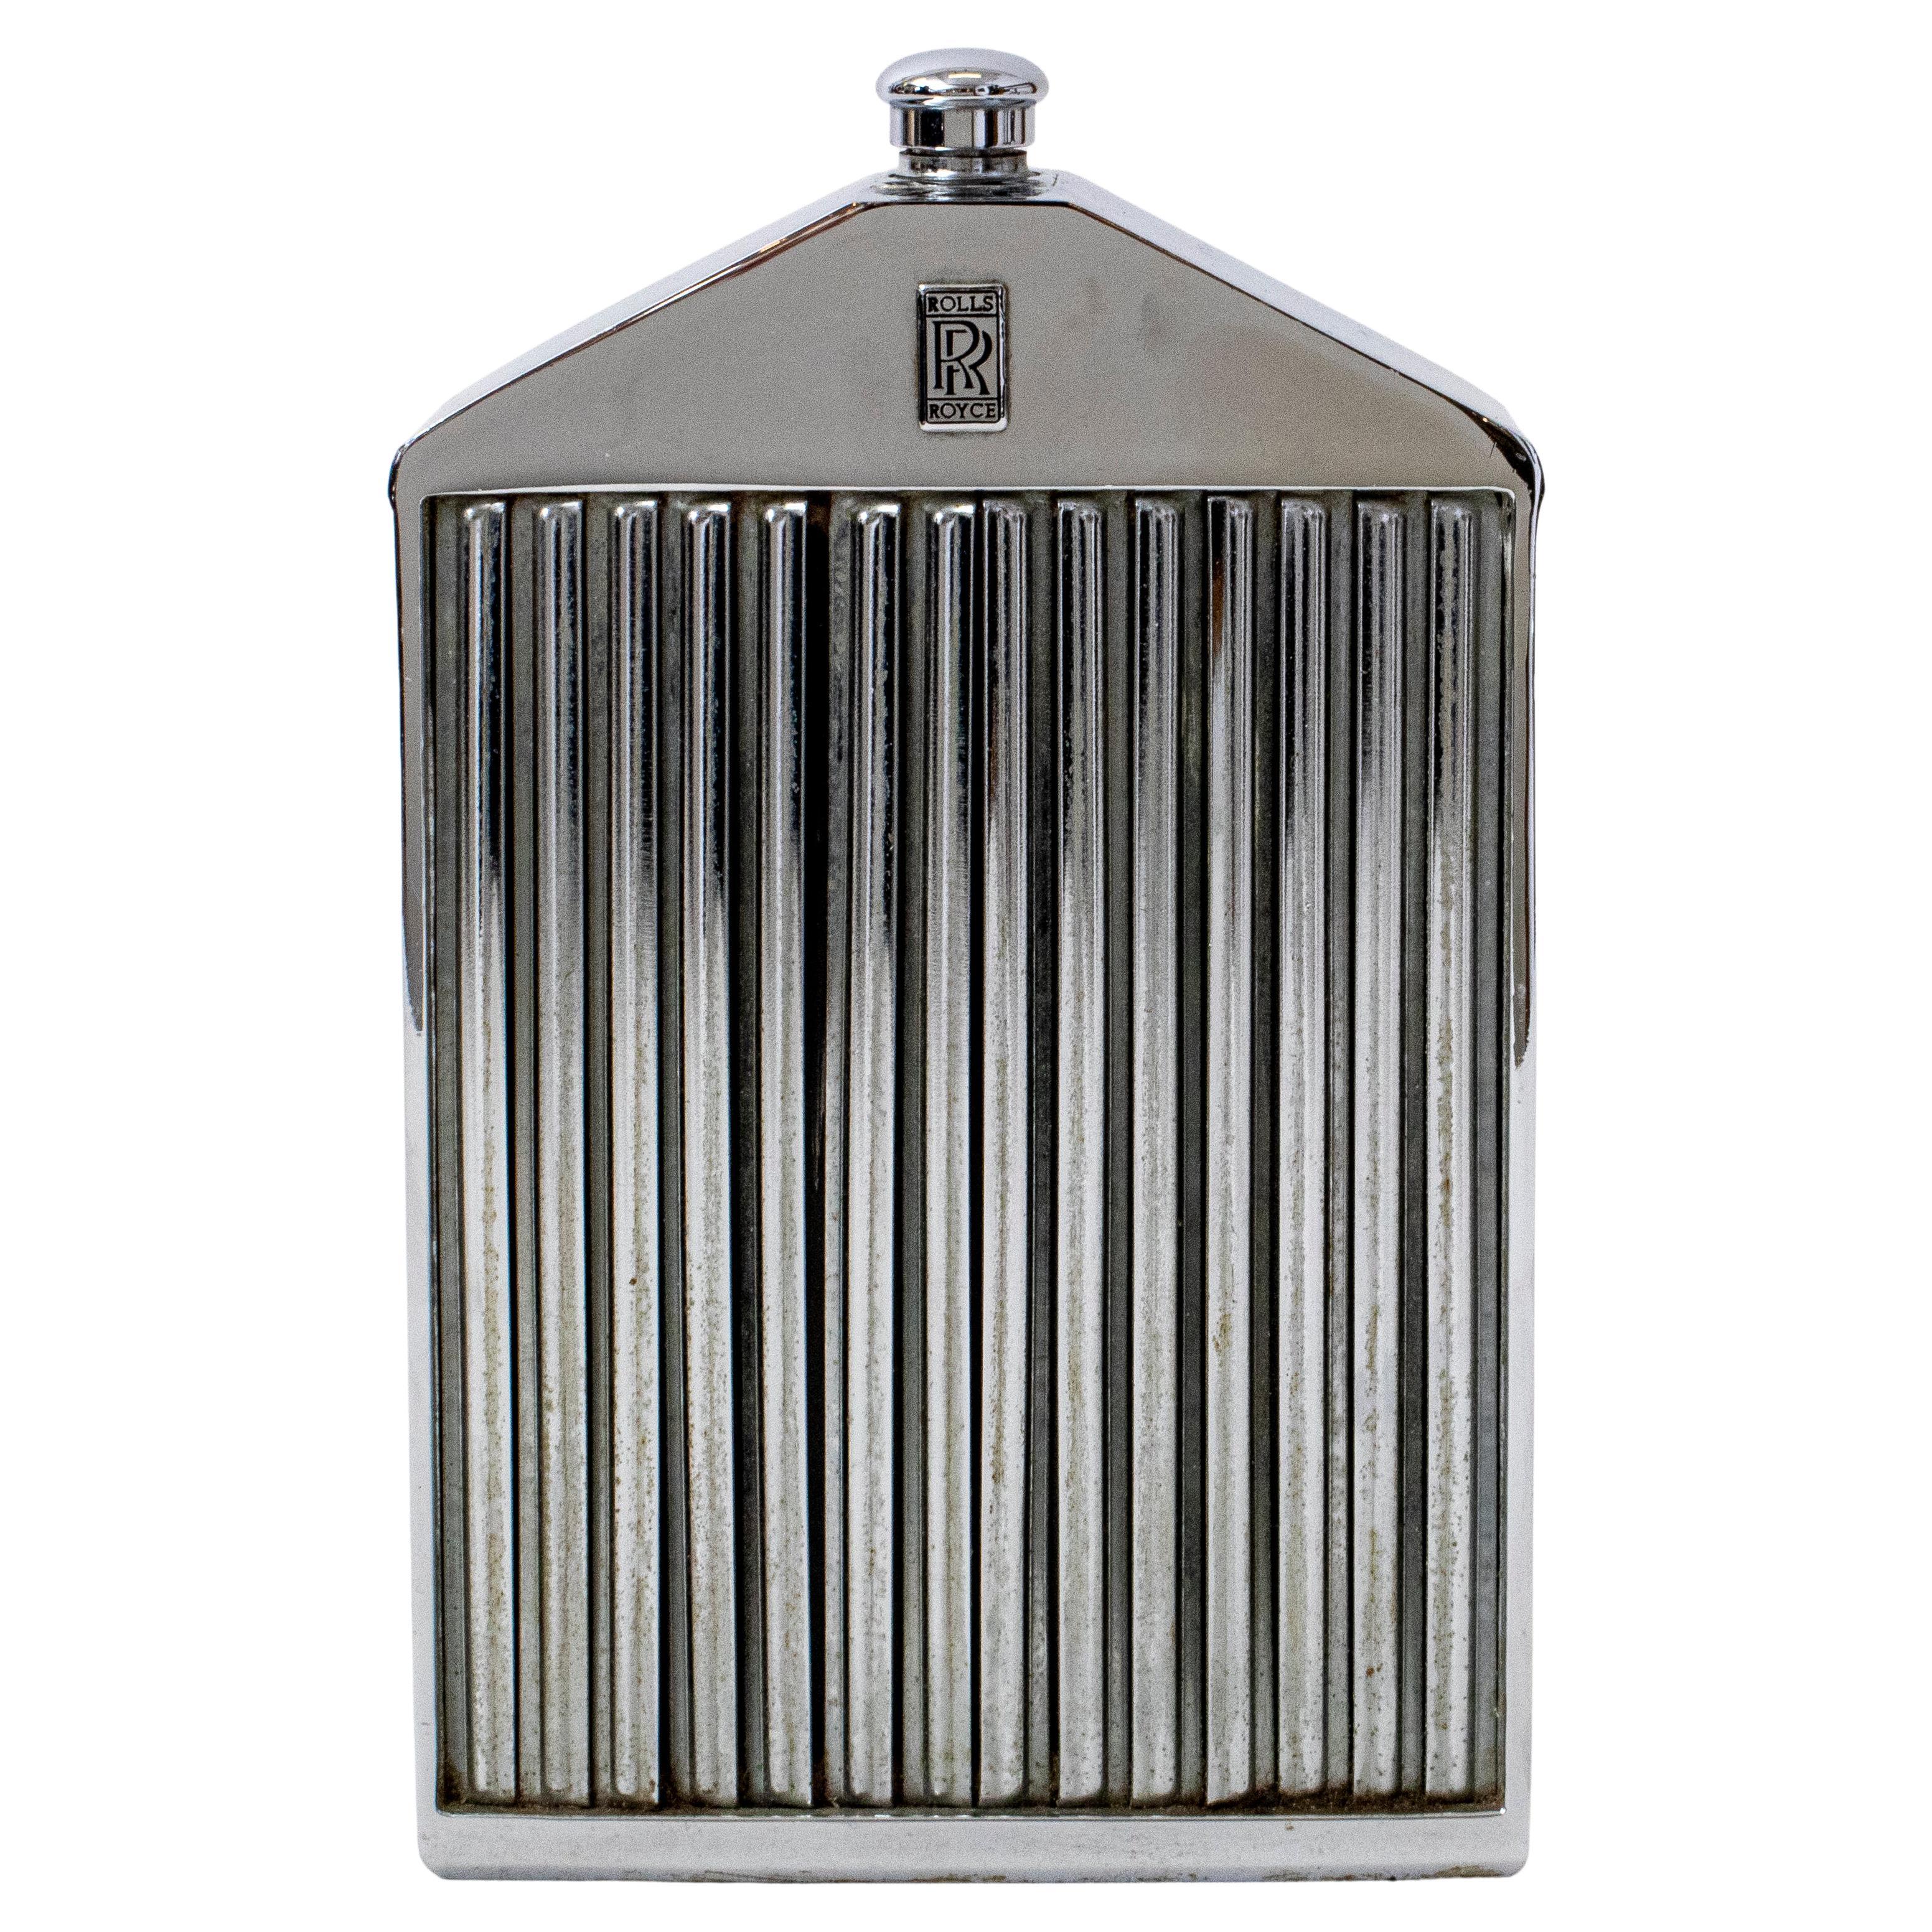 Mid-Century Chrome Plate over Rolls Royce Radiator Grill with Decanter